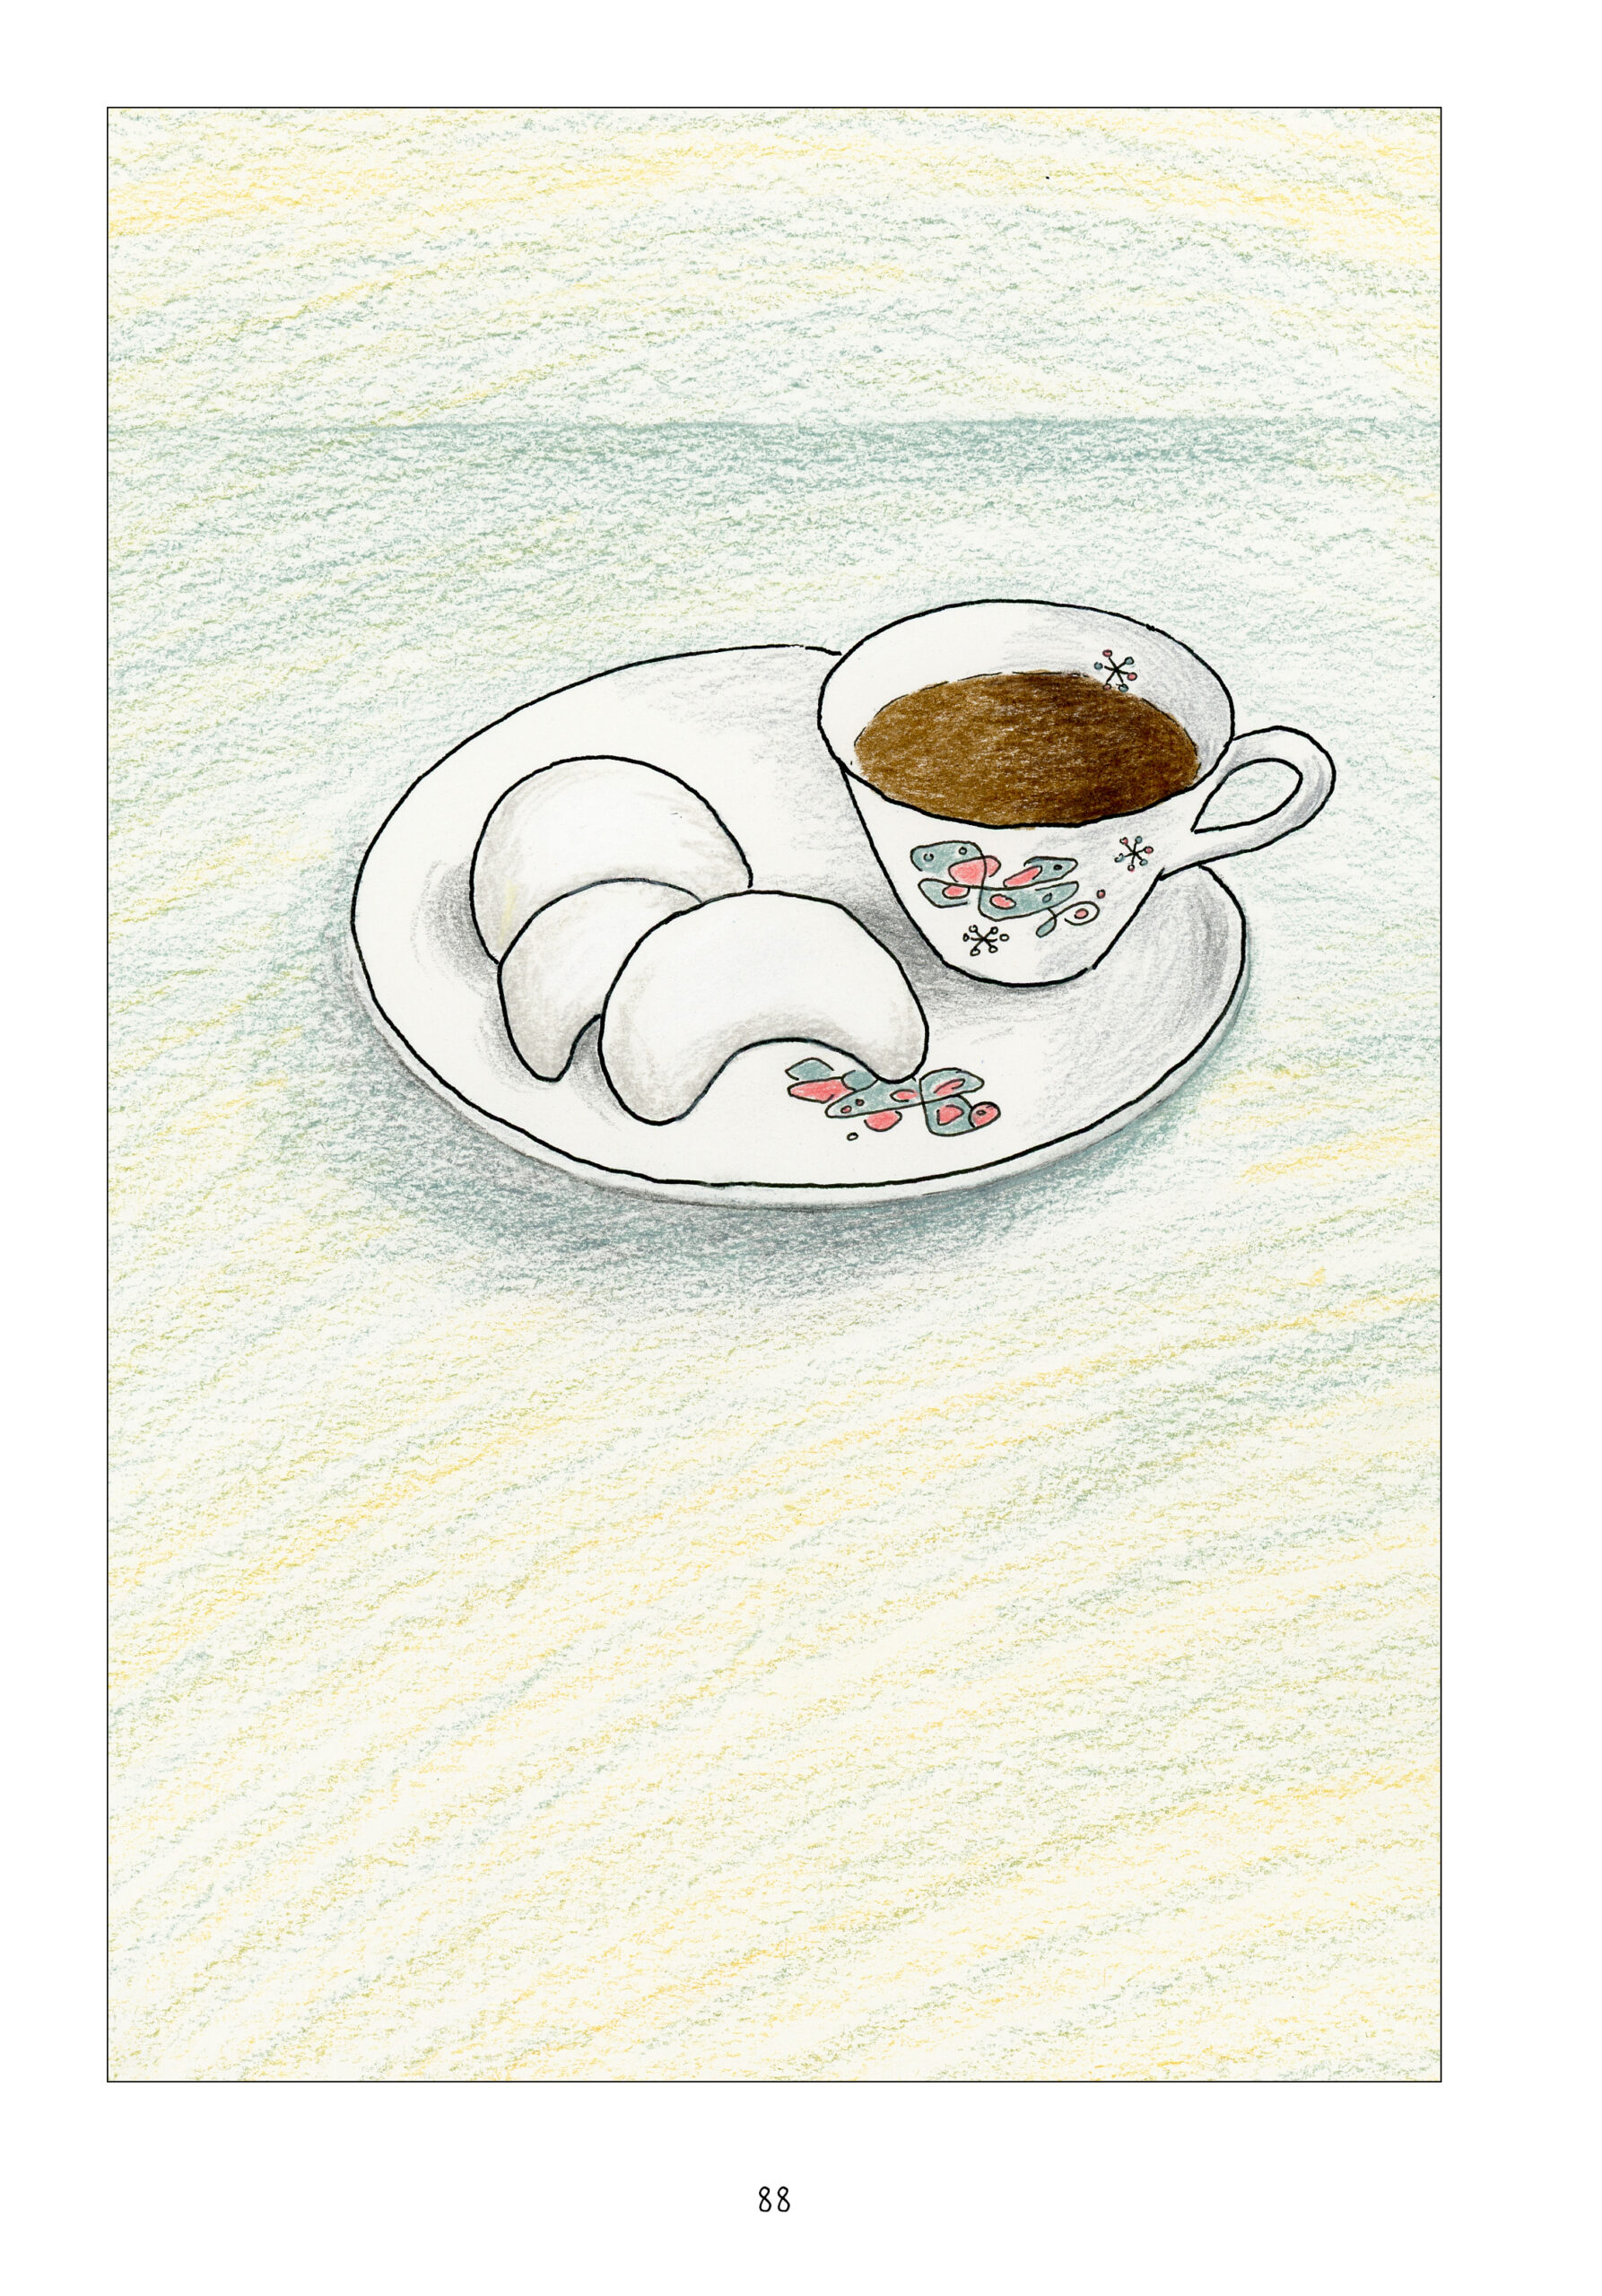 A full-page image of a tea cup sitting on a little tea plate, drawn in full color. The cup sits at the right side of the plate; three white, crescent-shaped biscuits sit to its left. The cup and plate both have the same blue and pink geometric designs as the set in a previous episode. The cup is full of a brown liquid, either tea or coffee. The background is a green and yellow color wash. 